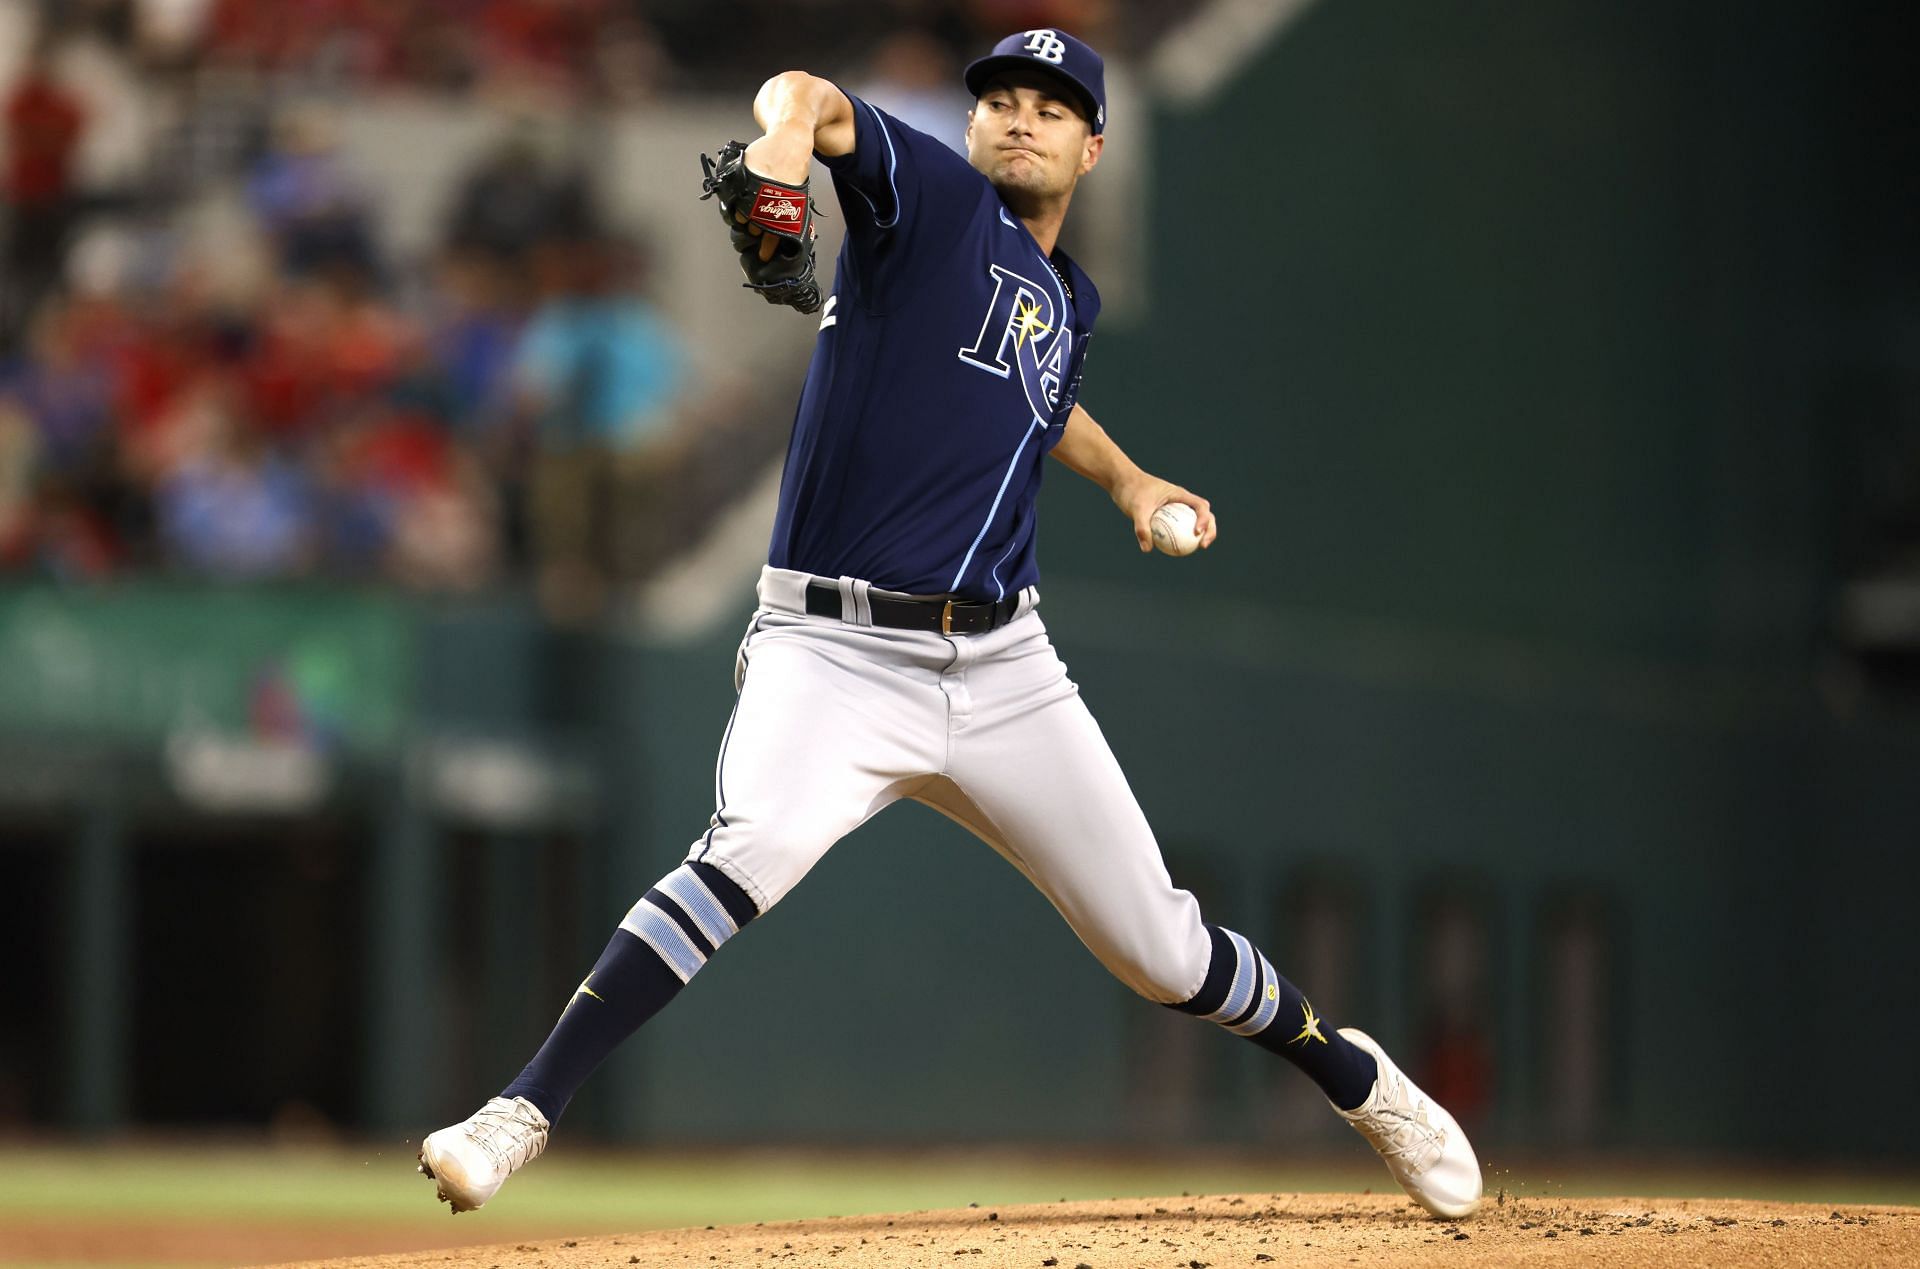 Shane McClanahan of the Tampa Bay Rays pitches against the Texas Rangers in Arlington, Texas